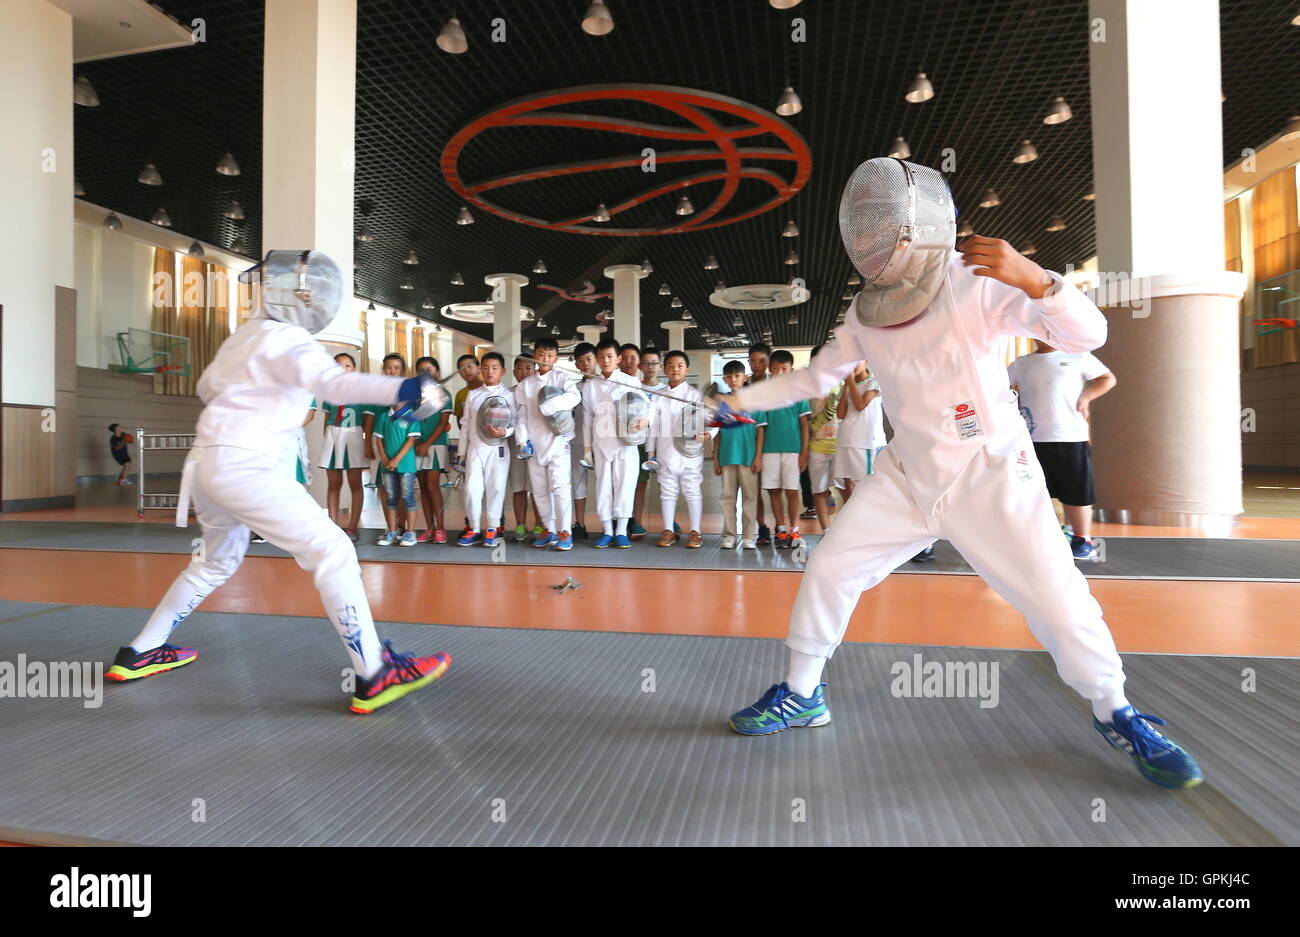 (160905) --JIMO, Sept. 5, 2016 (Xinhua) -- Students take fencing training at Tongji Experimental School in Jimo, east China's Shandong Province, Sept. 5, 2016. This school opened over 20 extra curriculums on robotic soccer, model airplane, opera mask painting, fencing, etc to enrich students' campus life. (Xinhua/Liang Xiaopeng) (wf) Stock Photo